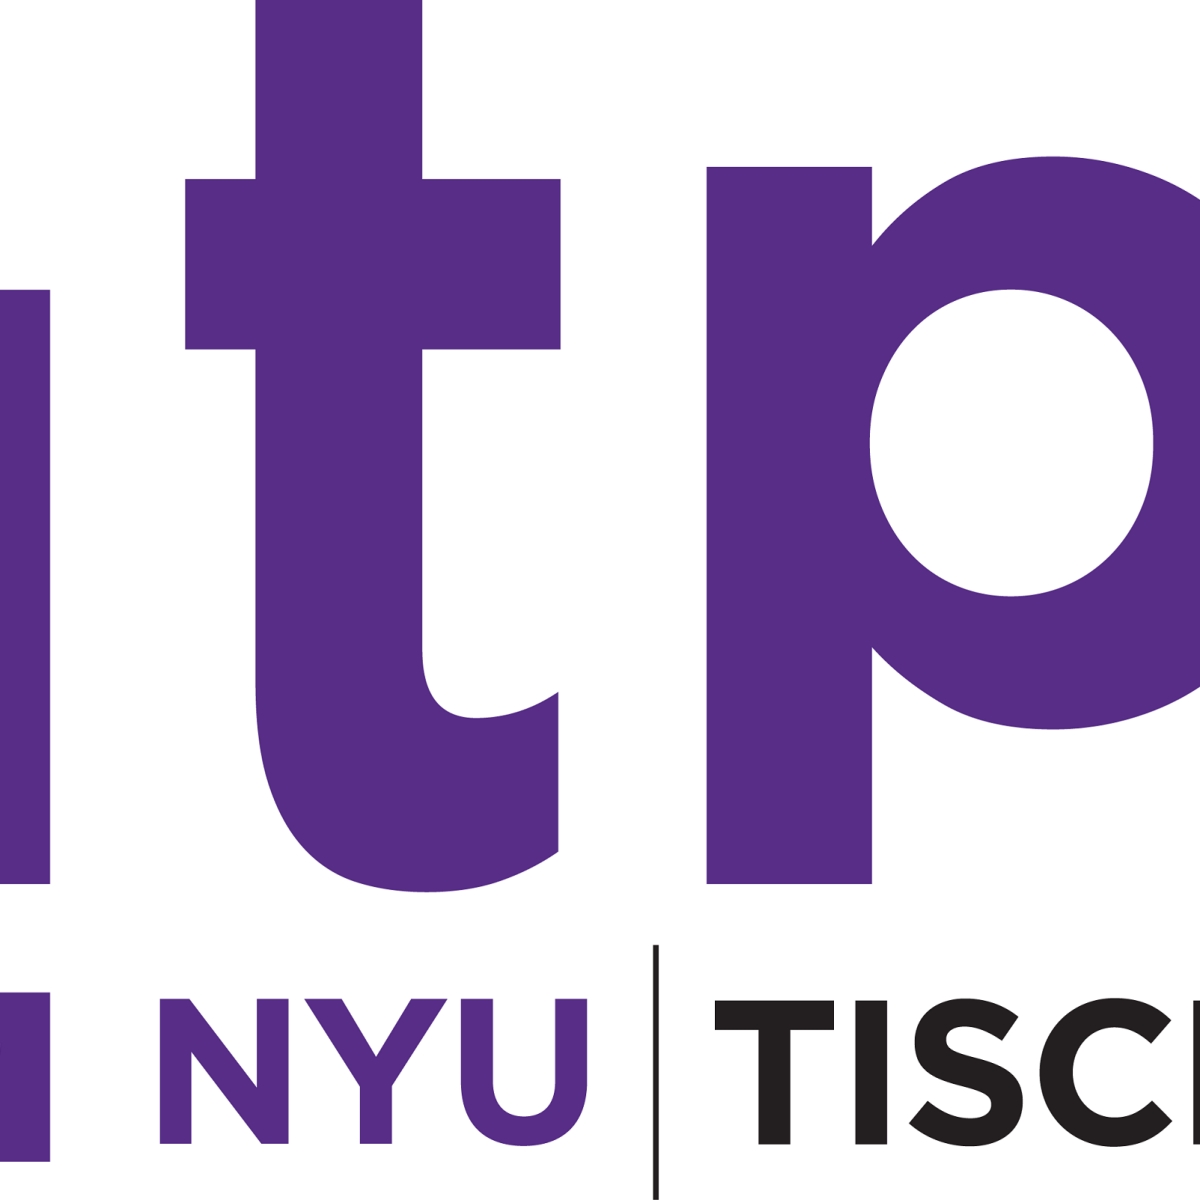 Image of ITP logo in purple.